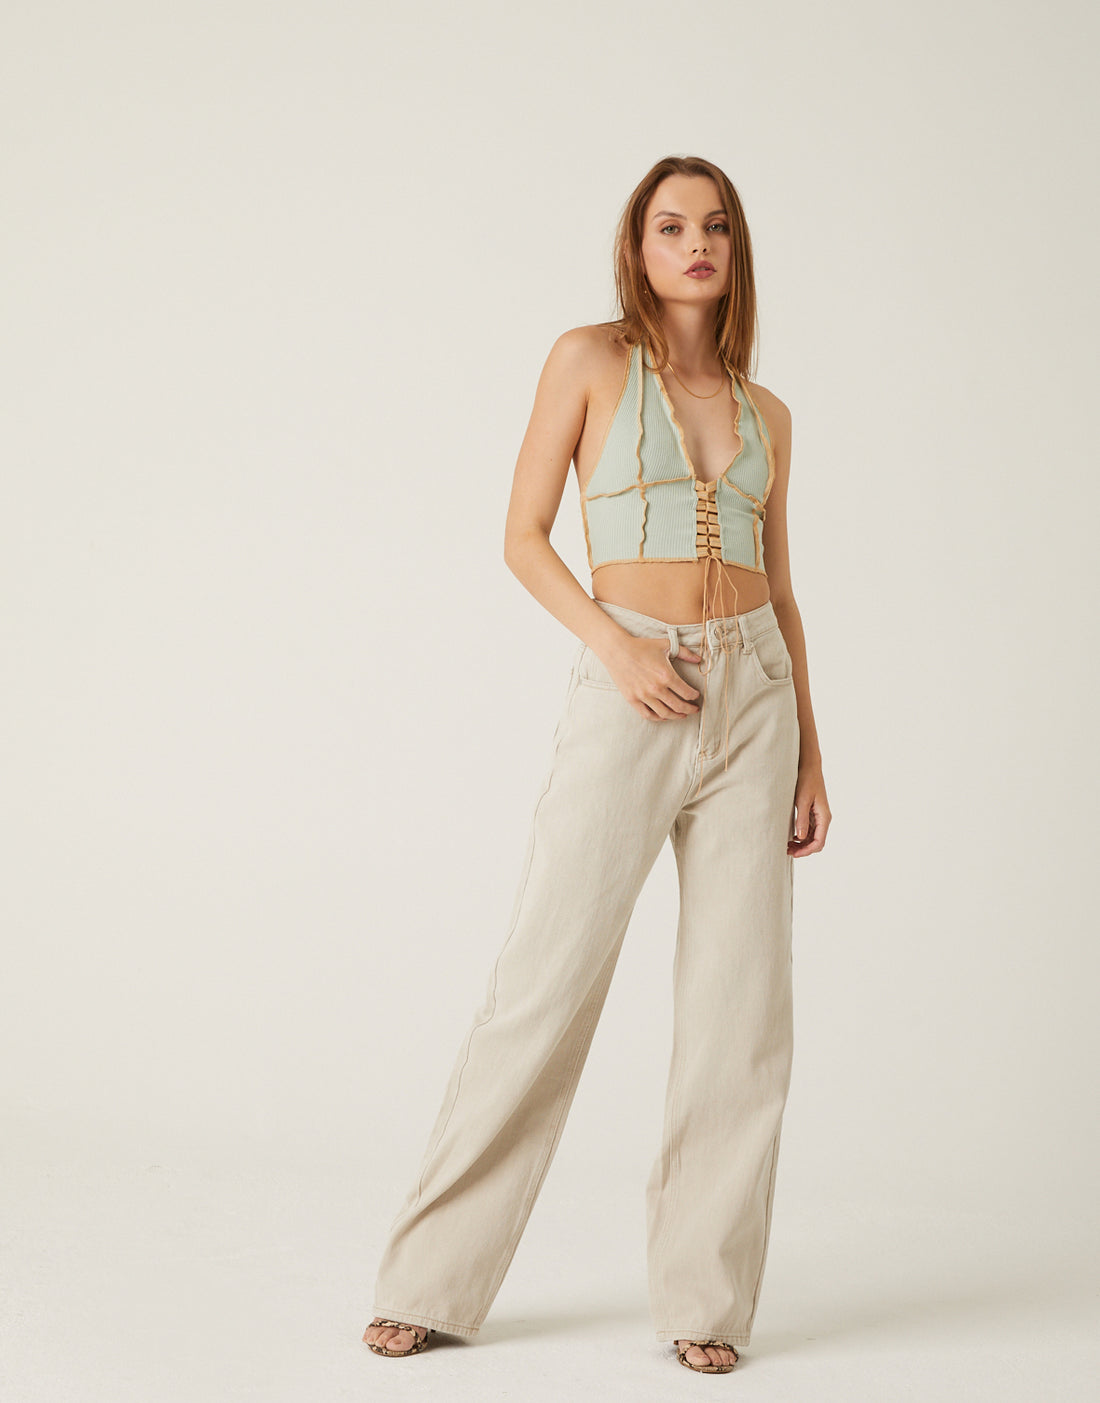 Seam Detail Lace Up Top Tops -2020AVE